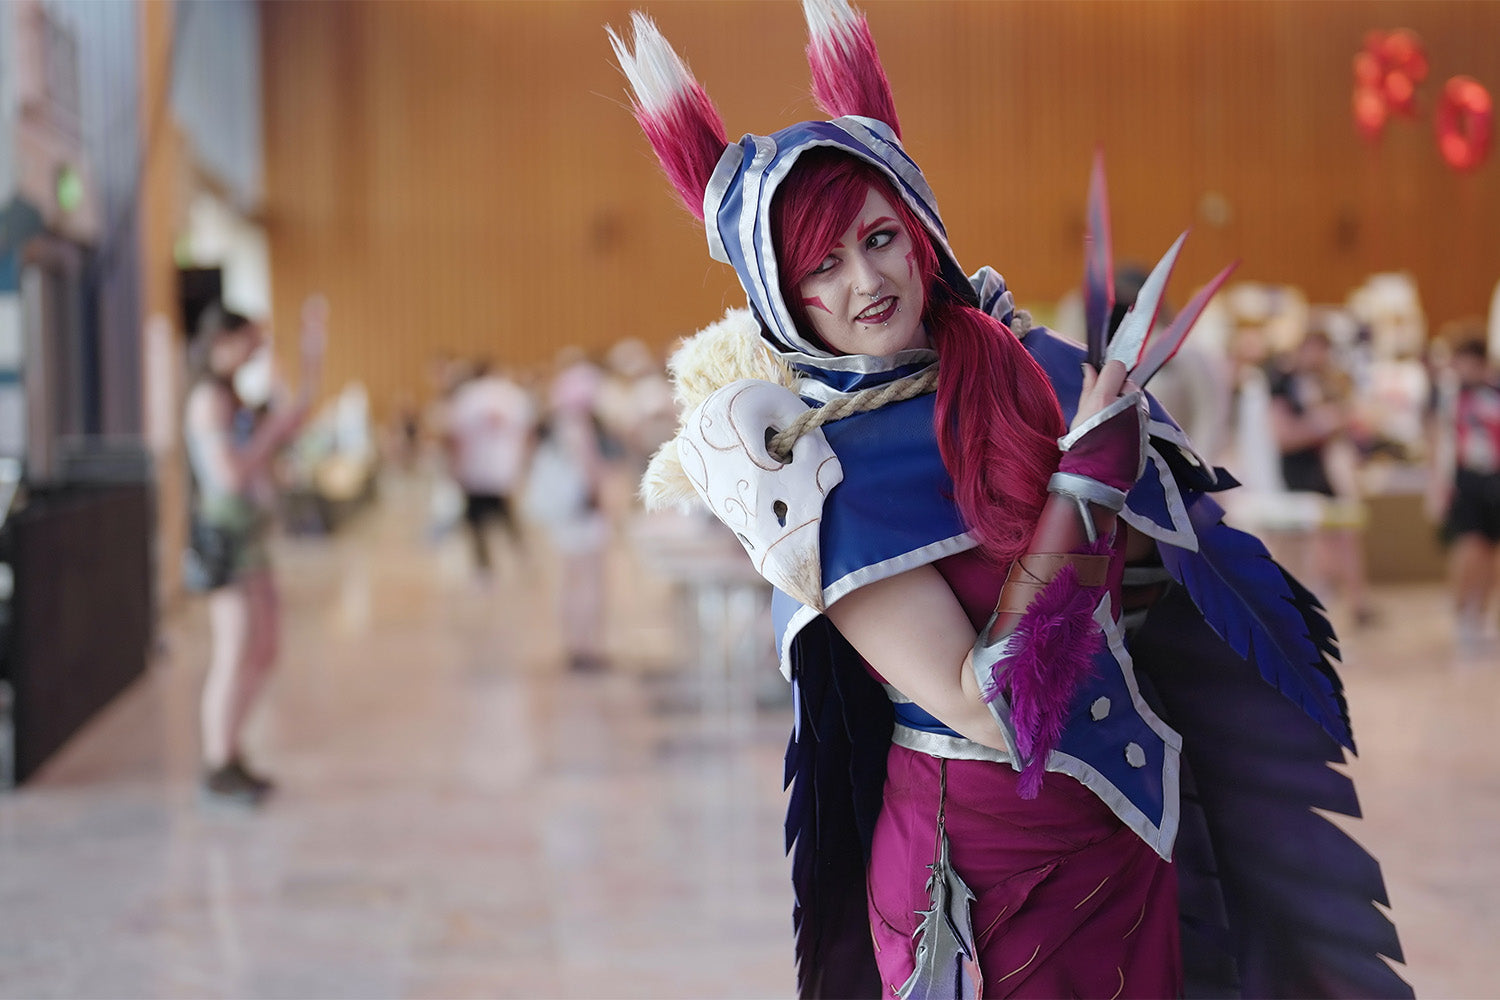 How Fans Run The Largest US Anime Convention As A NonProfit